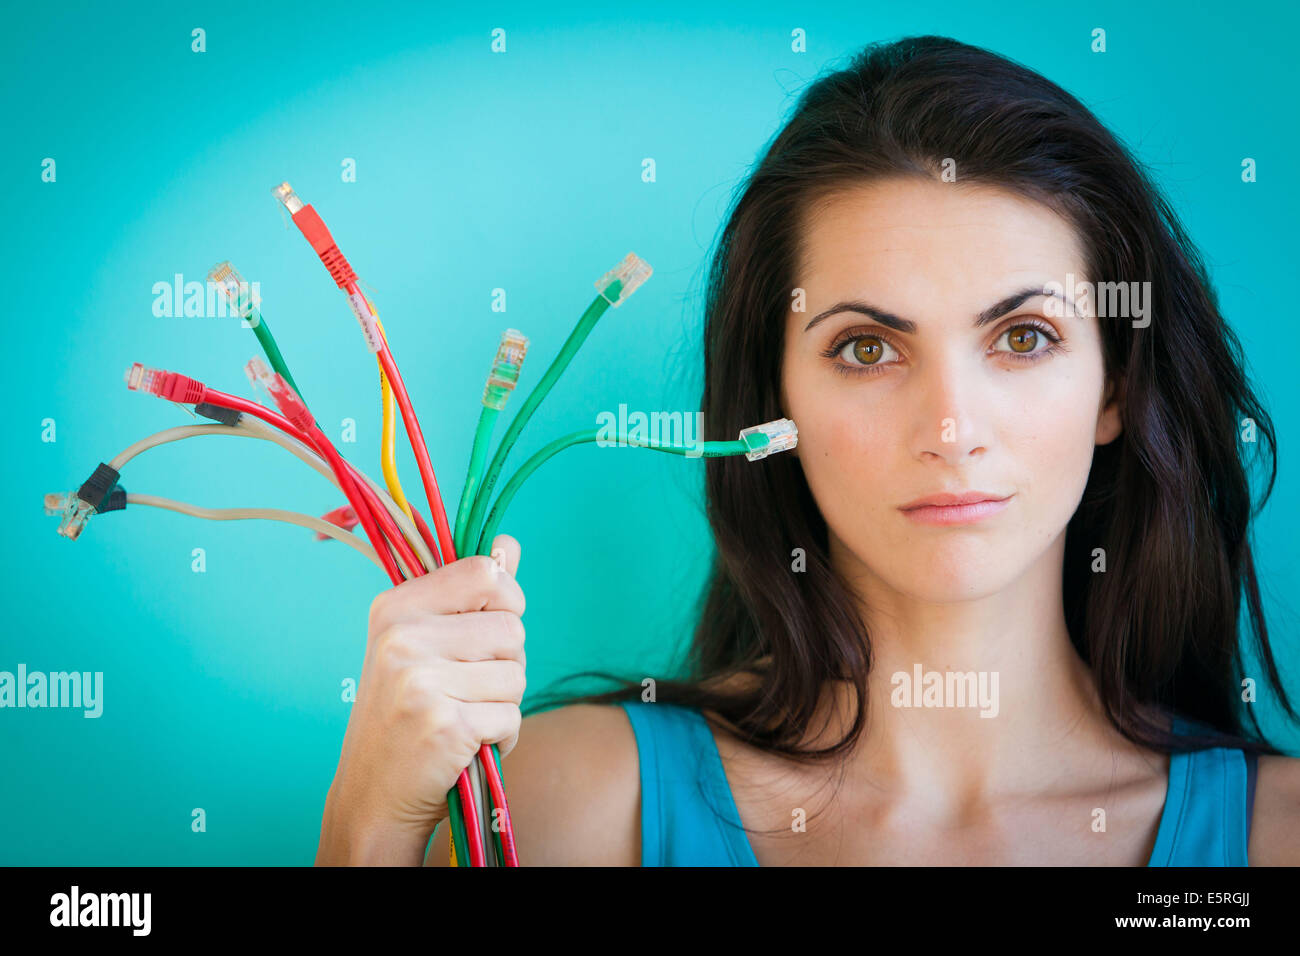 Woman holding ethernet cables. Stock Photo